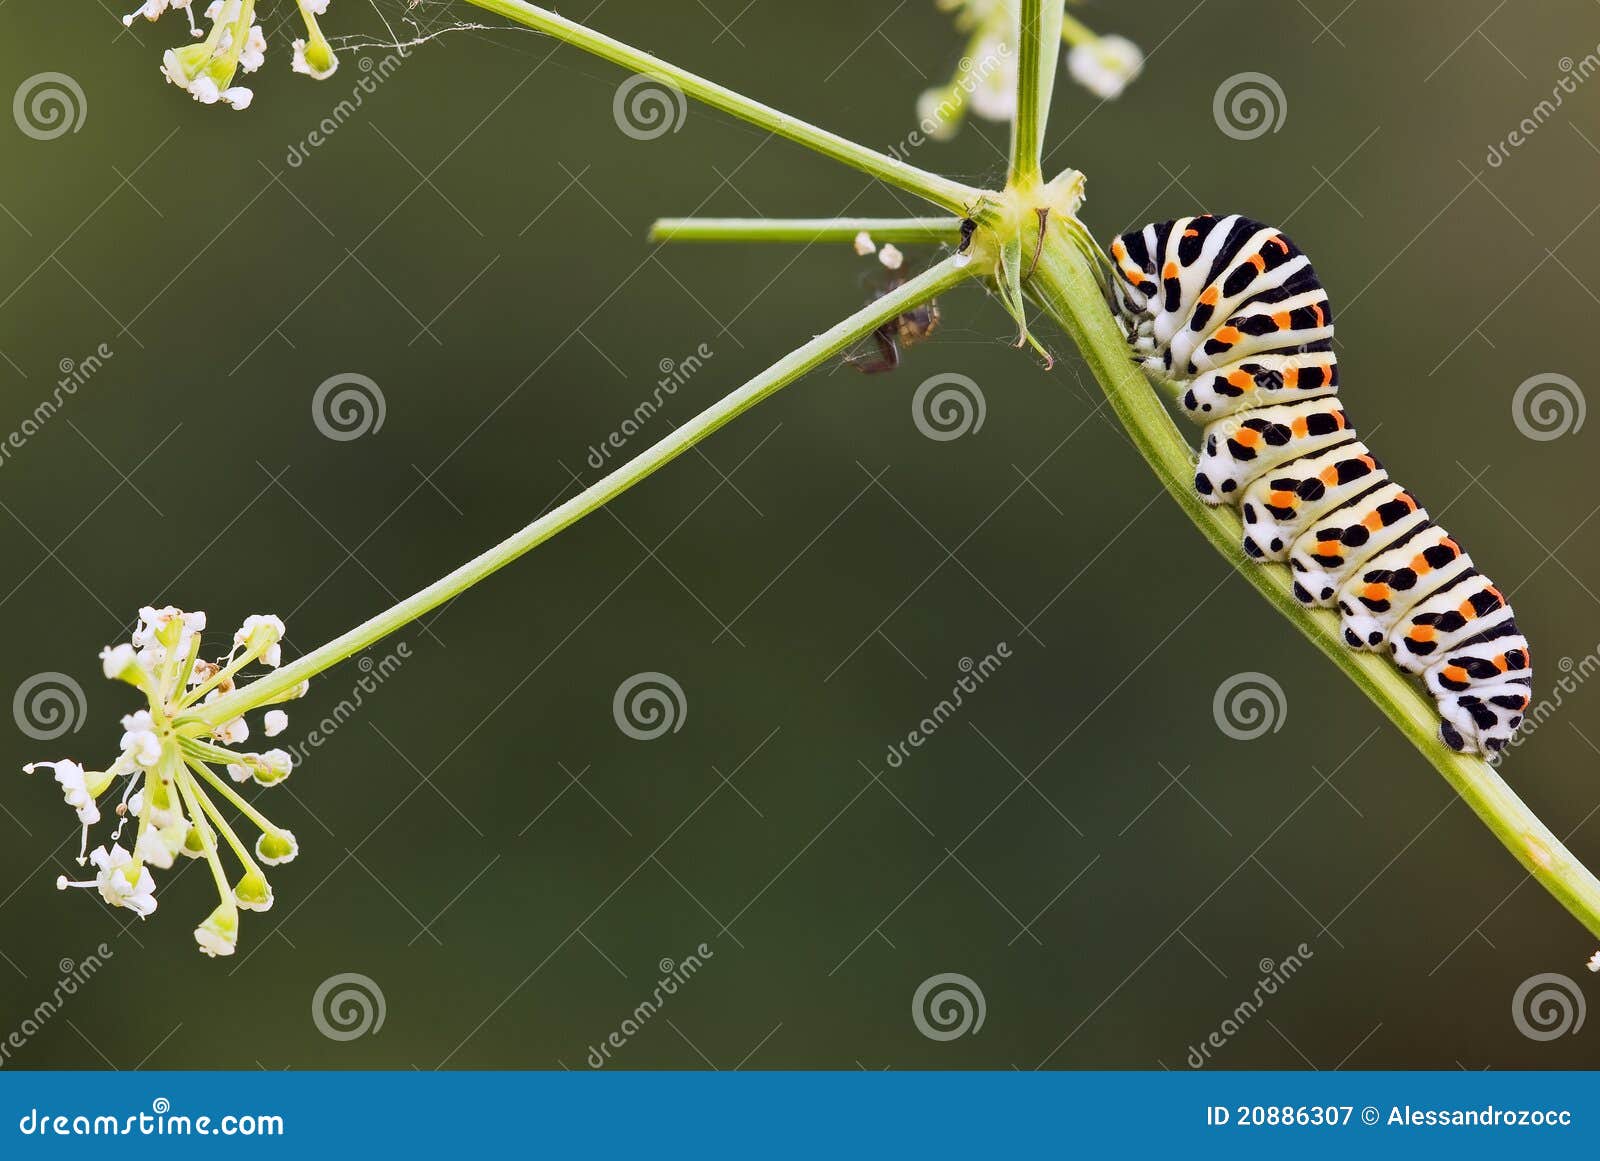 caterpillar of swallow tail butterfly